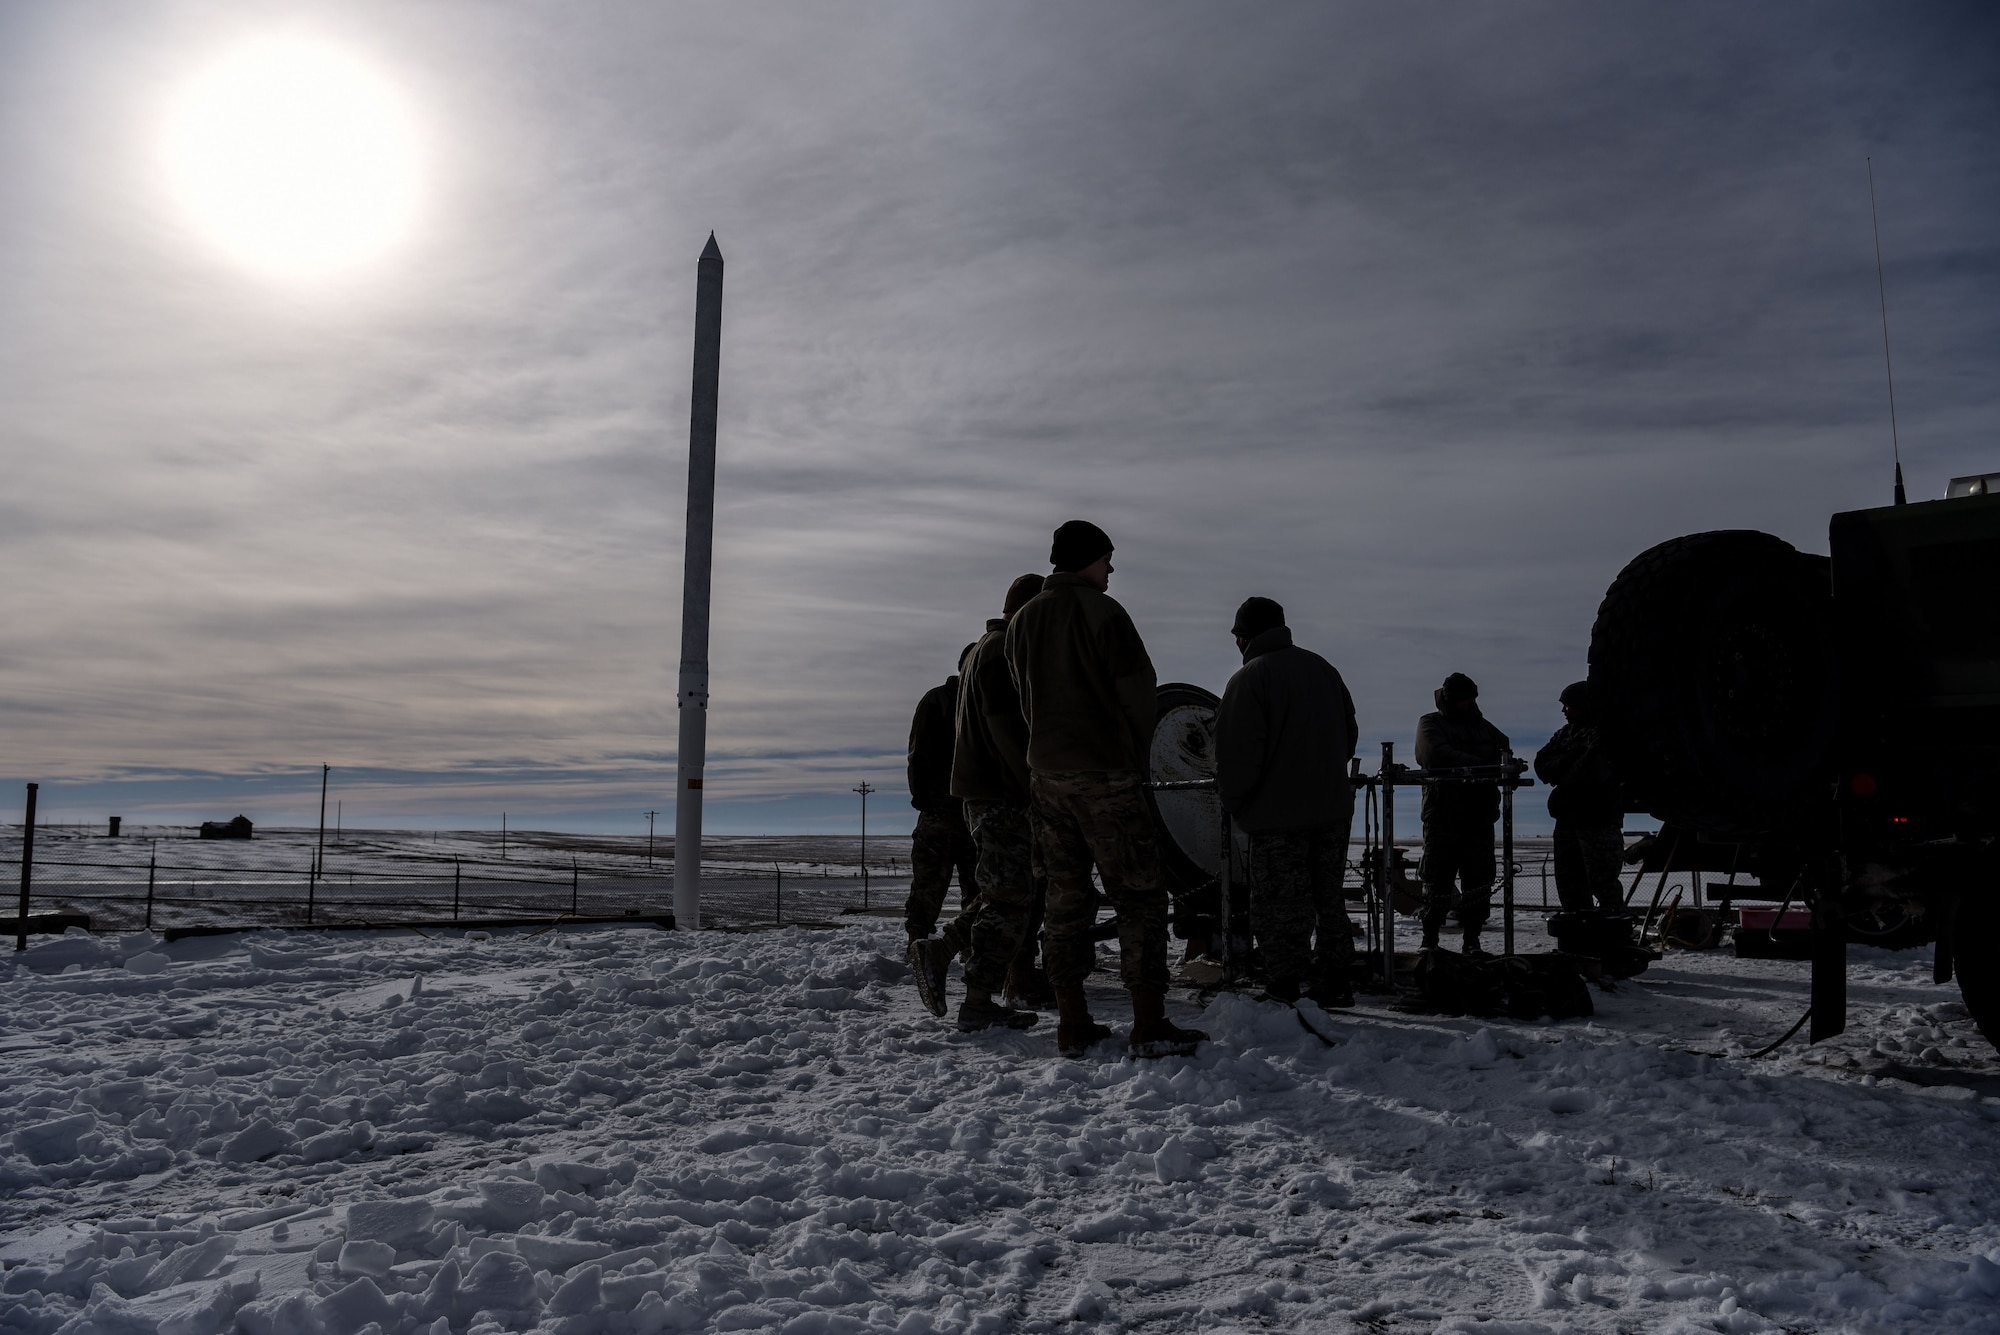 A group of 90th Missile Security Forces defenders wait for the ‘all clear’ indication before going down into a missile launch facility in the F.E. Warren Air Force Base missile complex, Dec. 28, 2017. Members of the 90th Missile Security Forces Squadron got the chance to go into a missile launch facility to see what they protect every day.